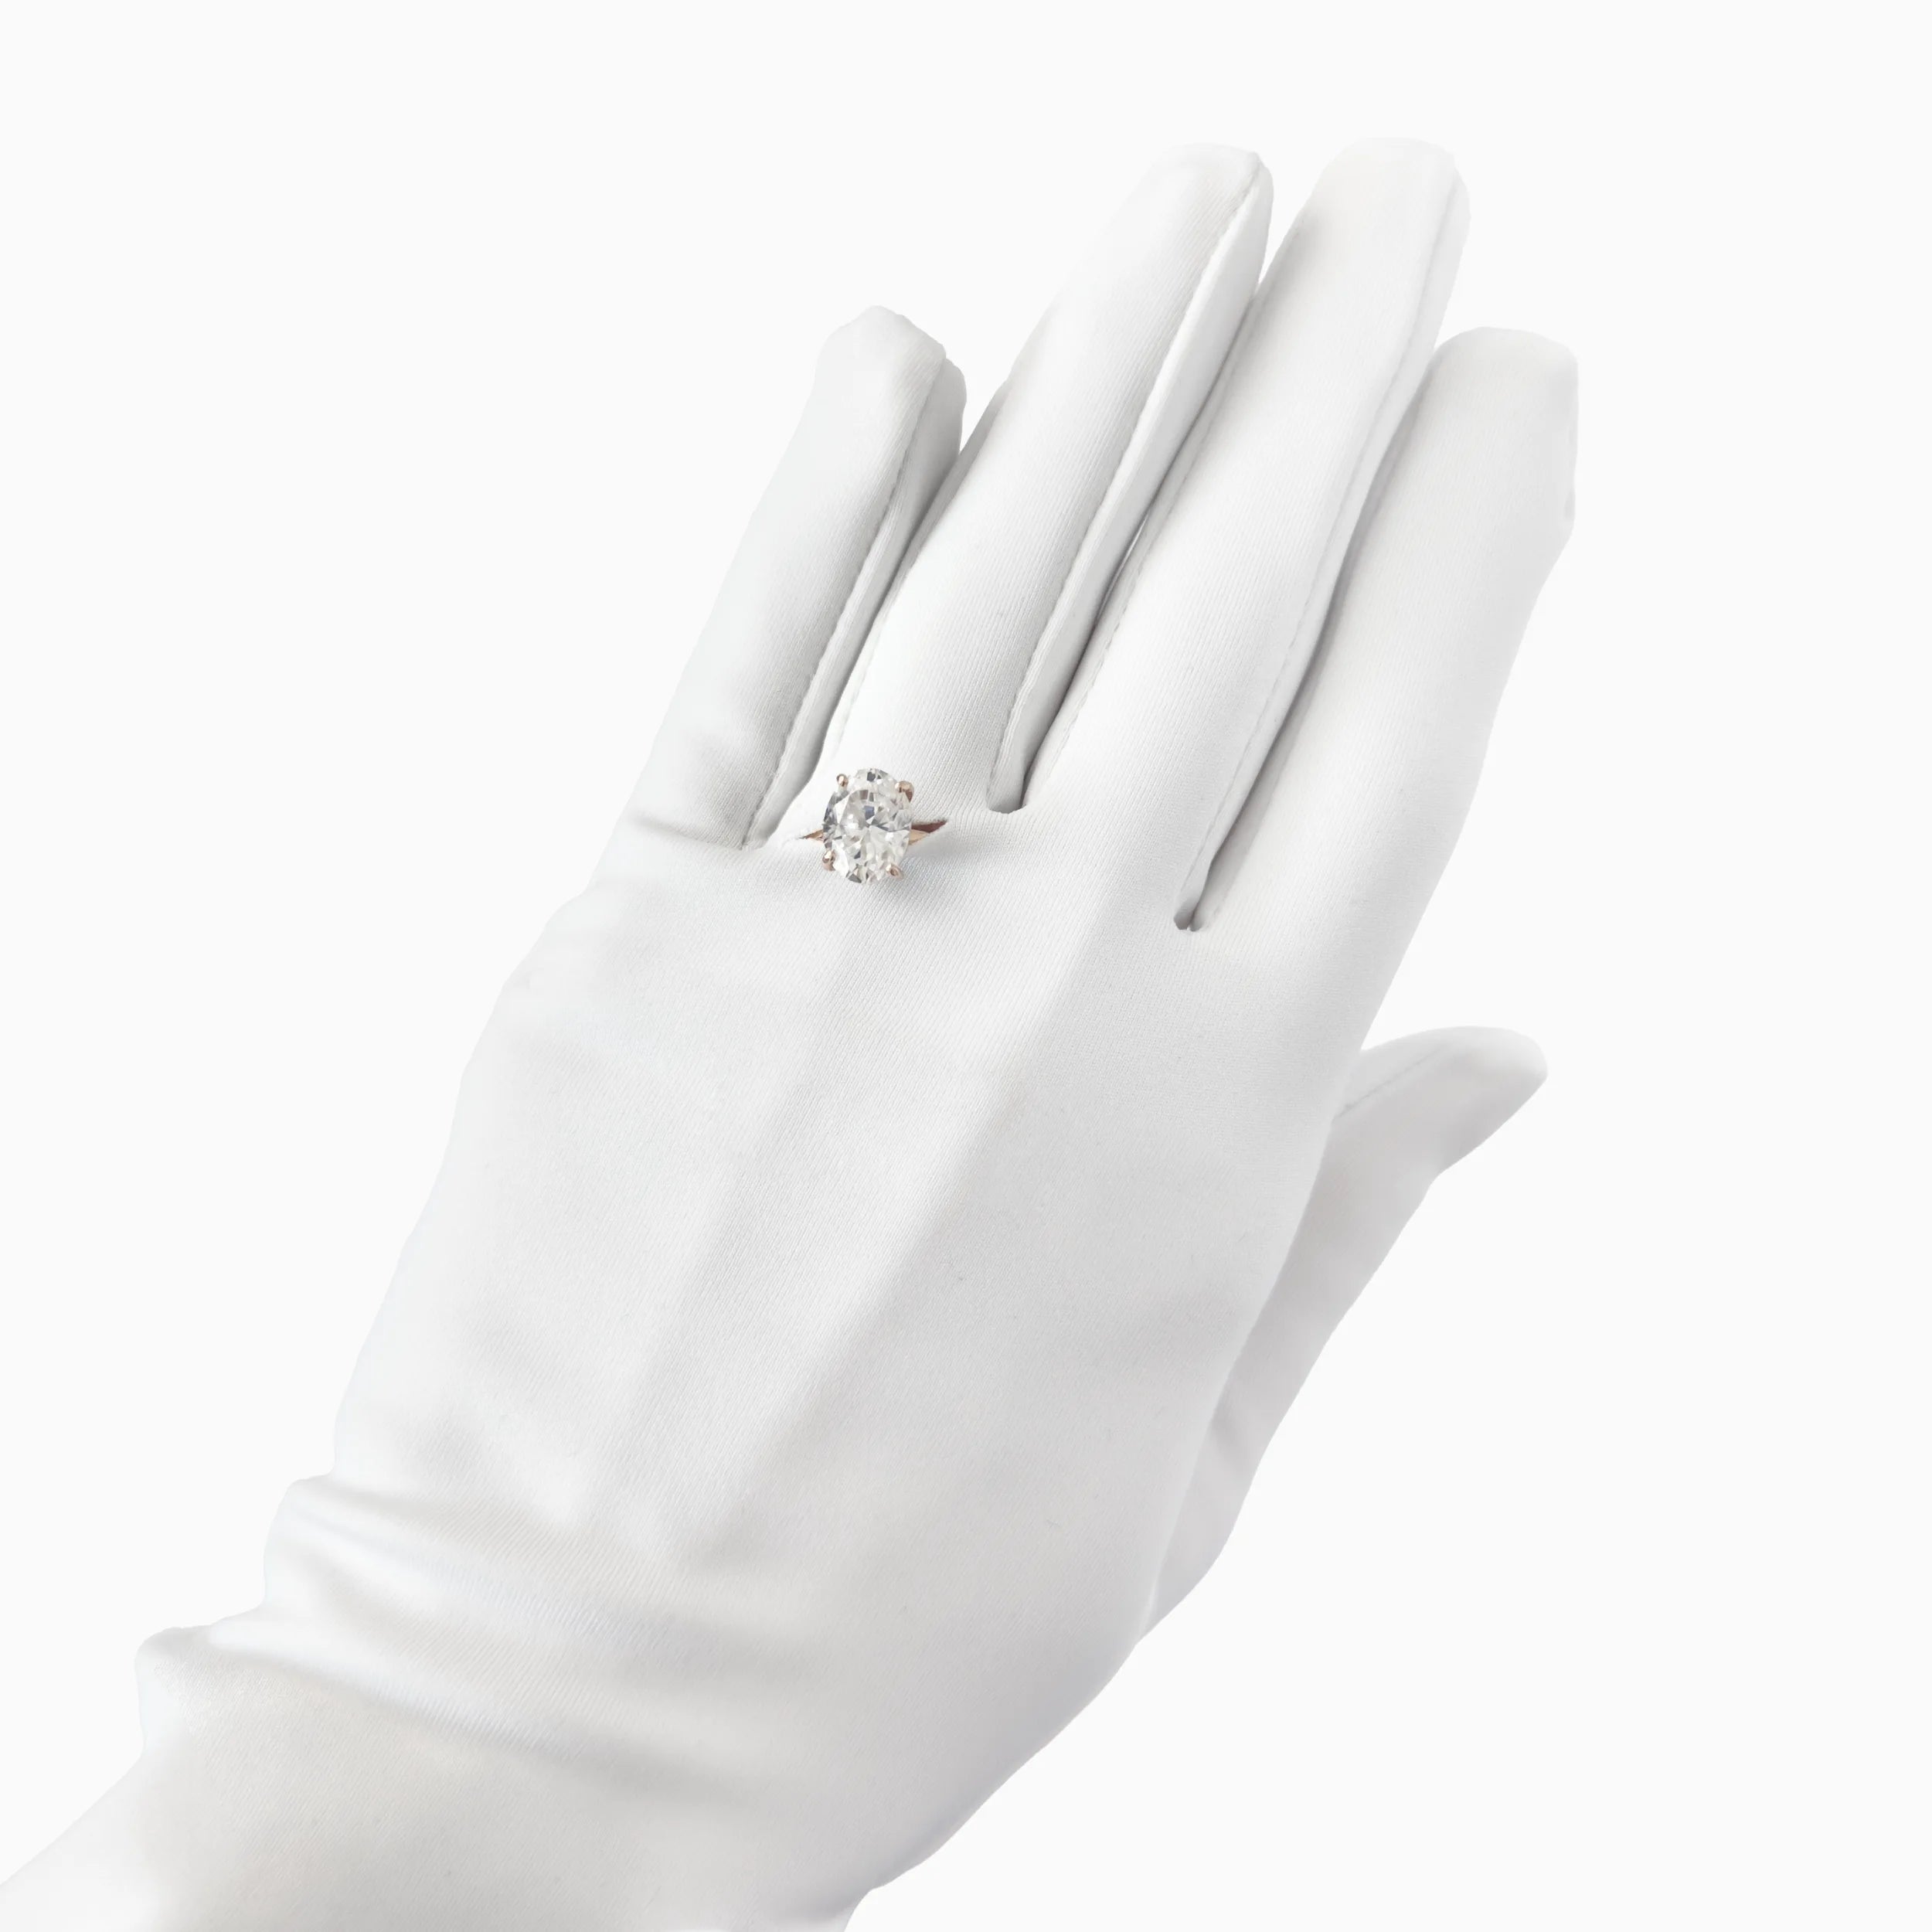 A hand wearing THE SUNNY - White Opera Gloves by LadyFinch and a diamond ring, displayed against a white background.